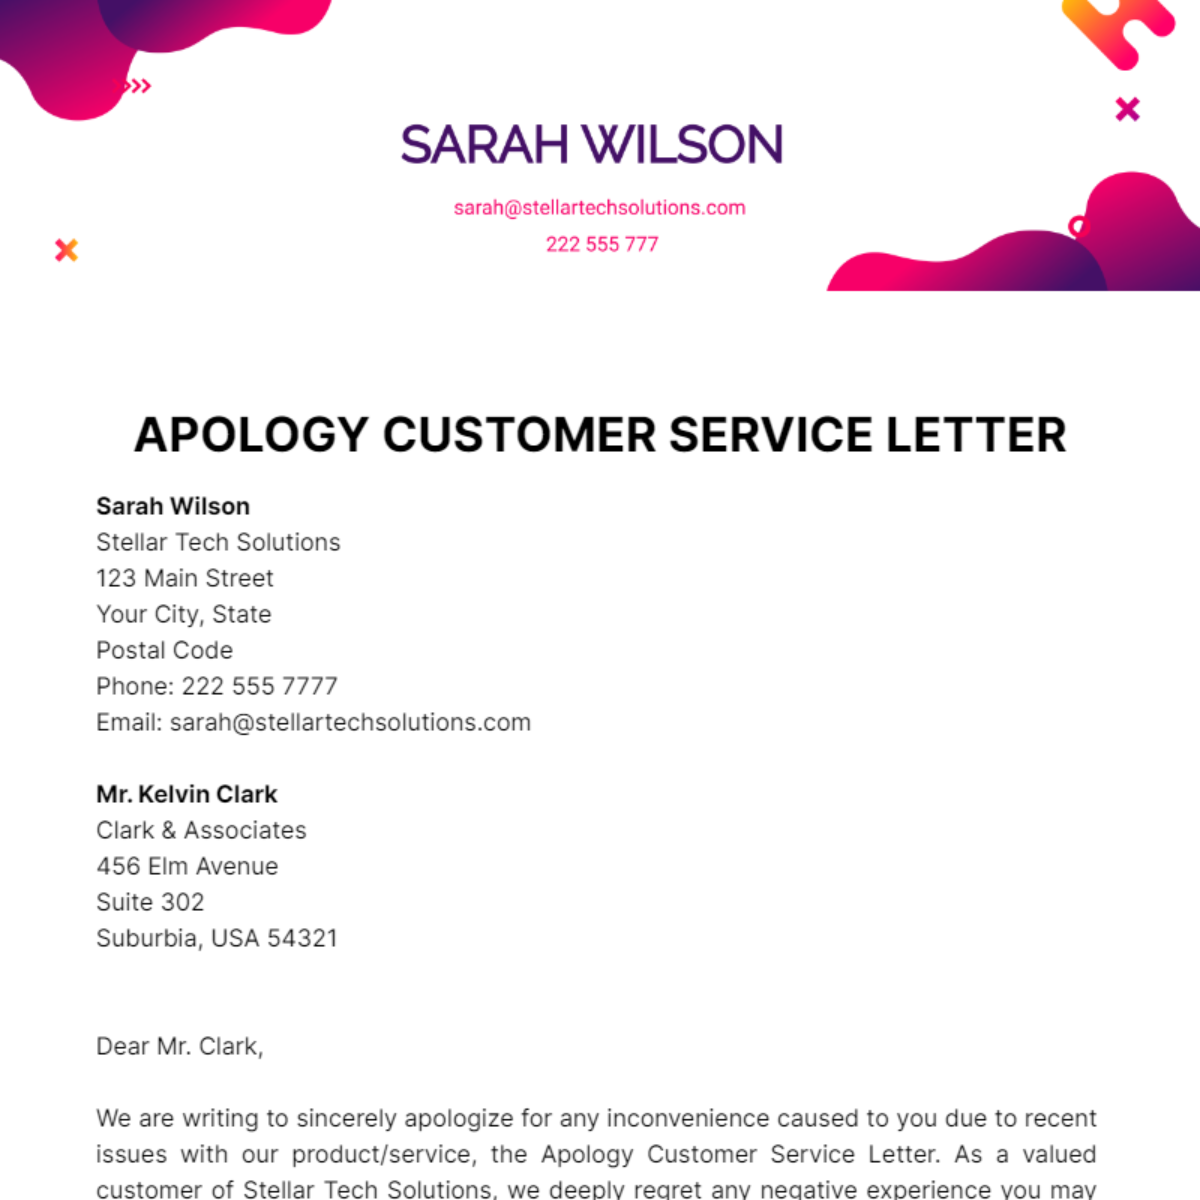 Apology Customer Service Letter Template